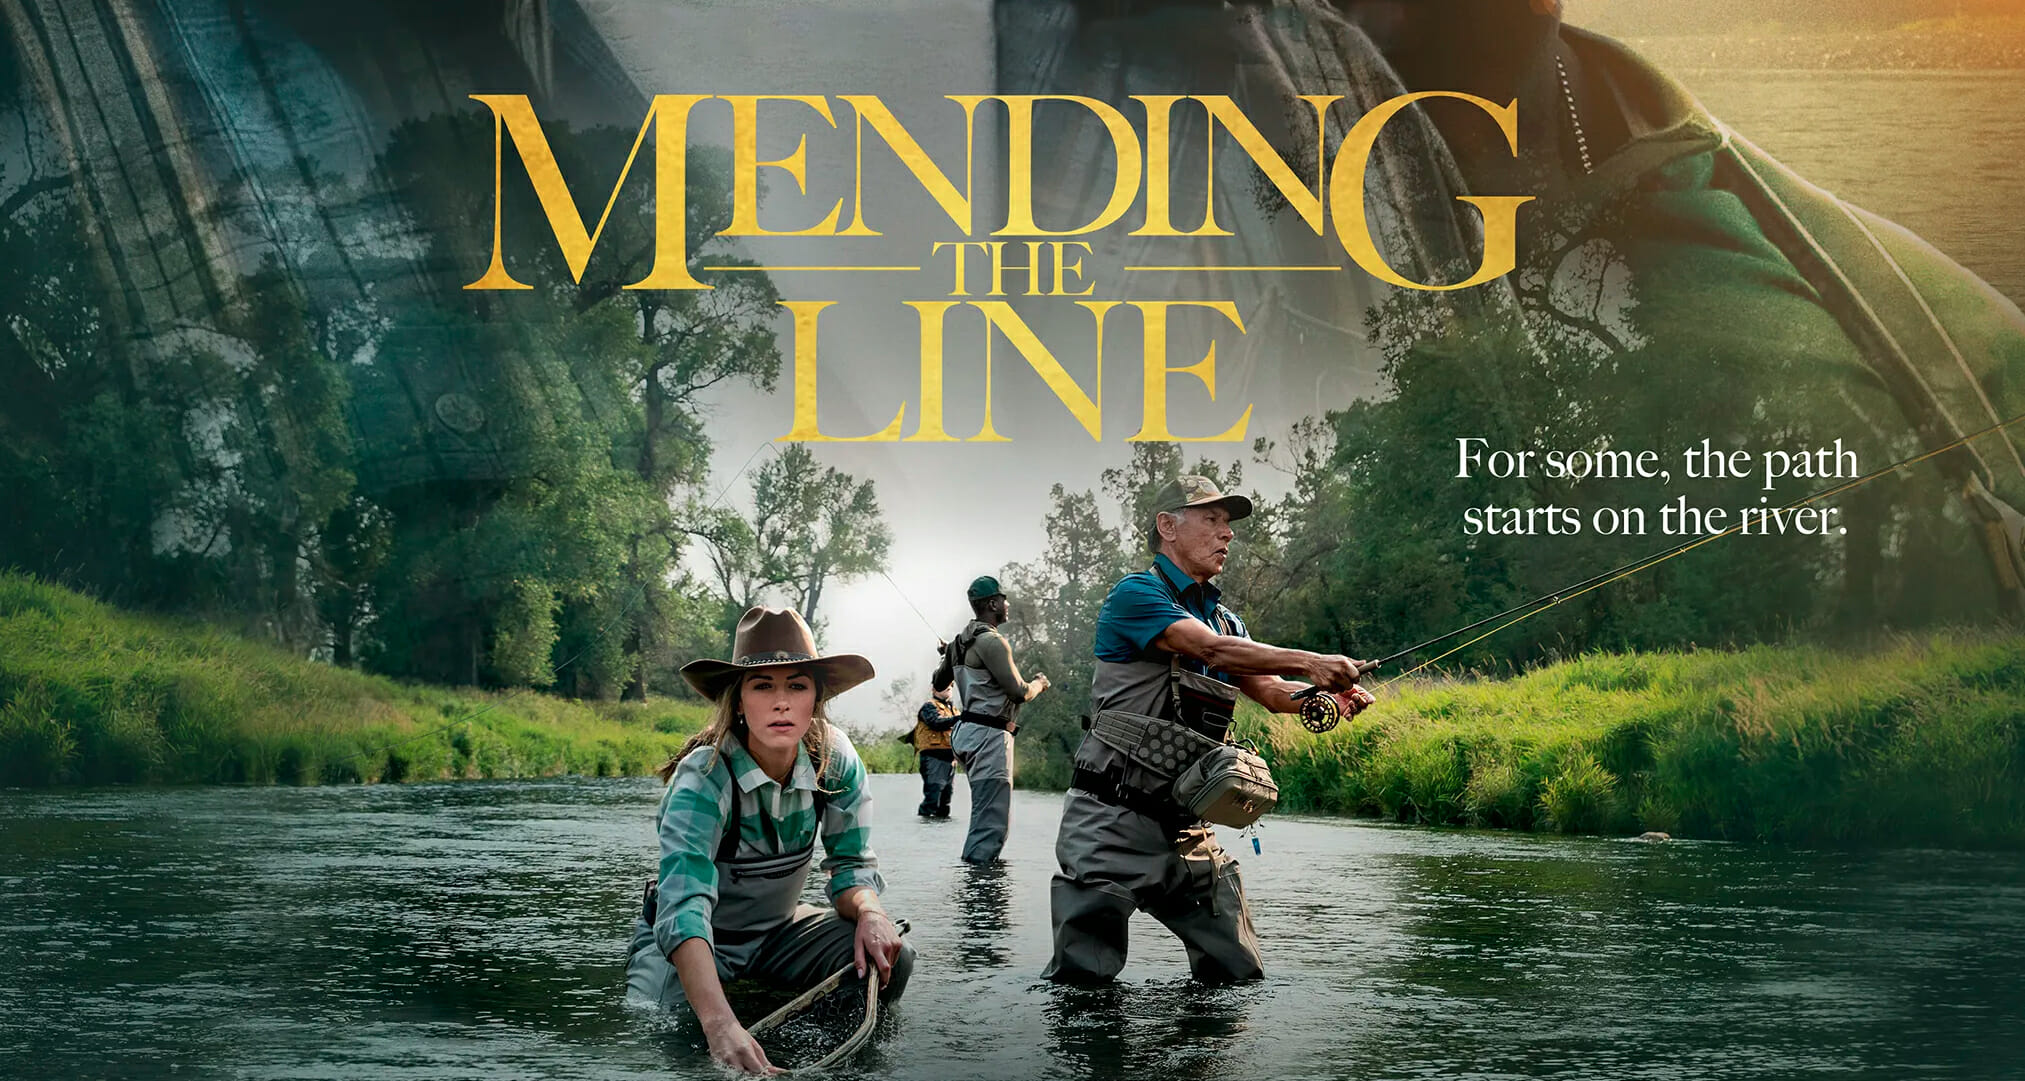 Mending The Line movie poster